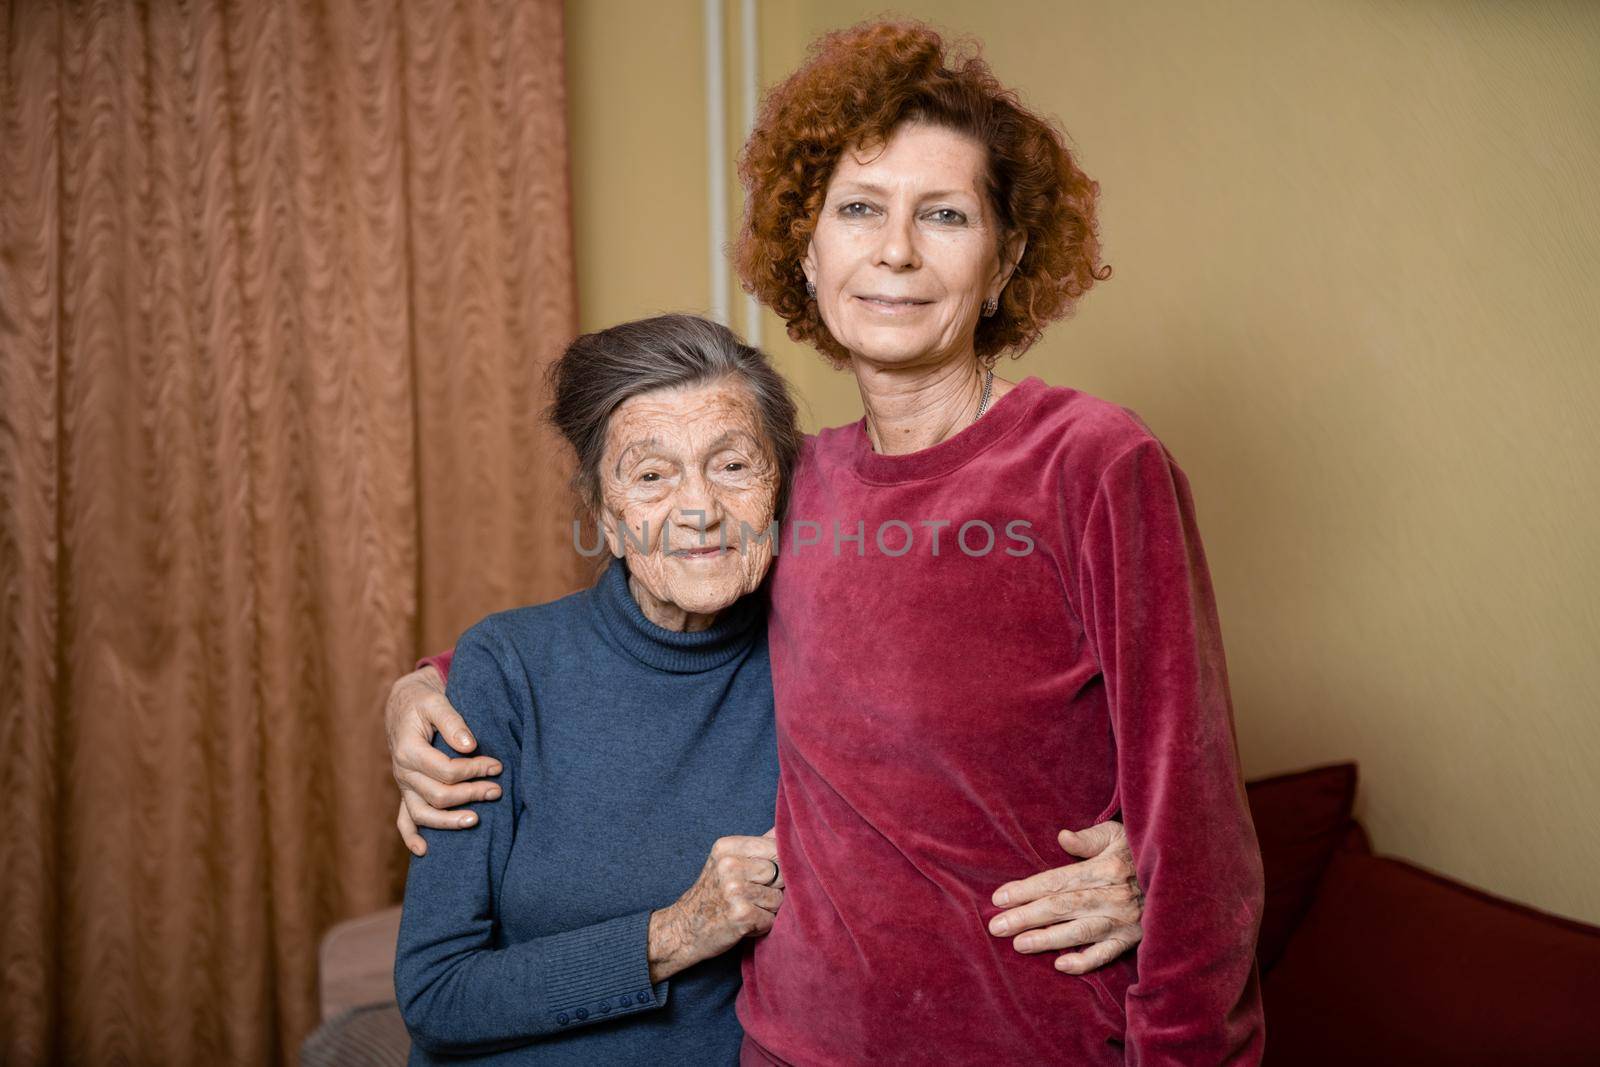 Adult daughter takes care of elderly mother suffering from dementia, old woman ninety years age gray hair and wrinkles on face and sweet kind smile, family idyll caring for elderly, hug each other.